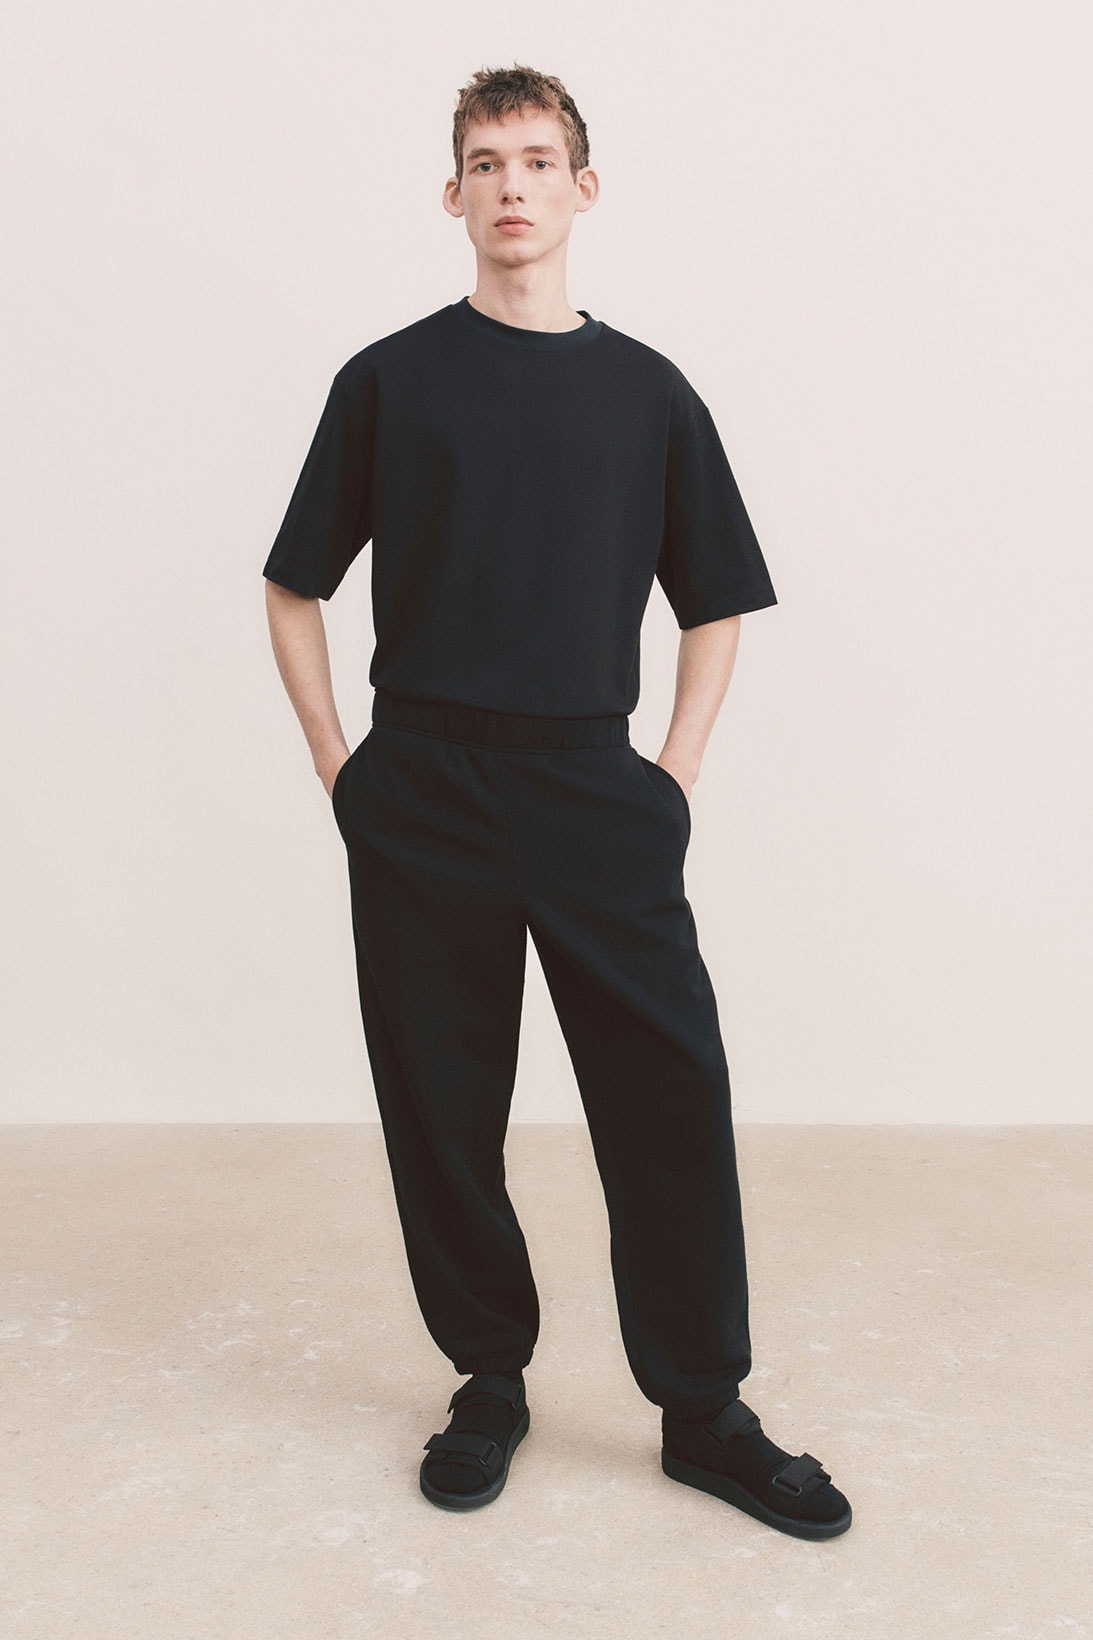 uniqlo u spring summer collection black tee t shirt pants shoes